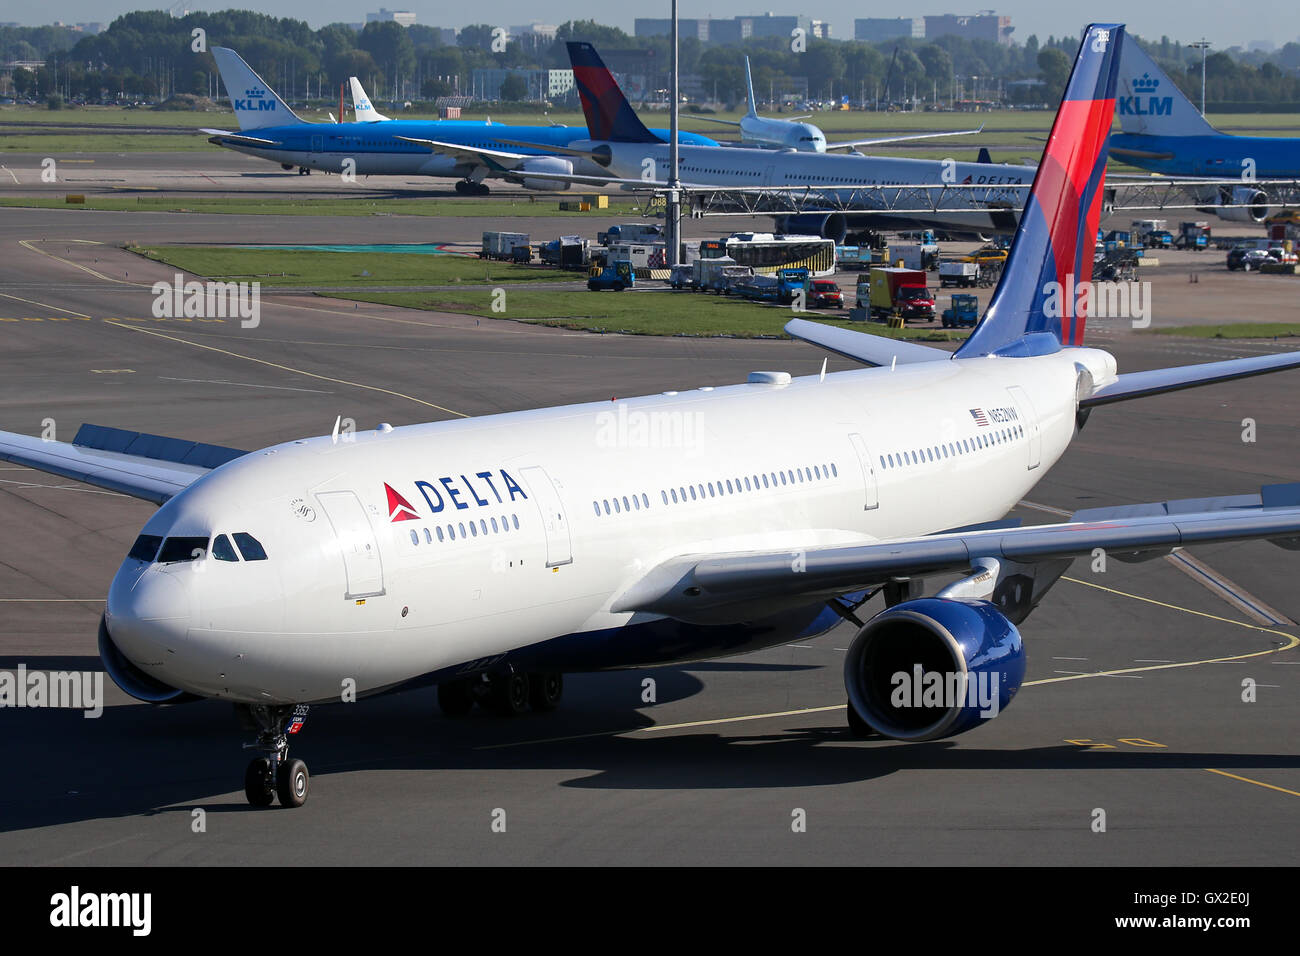 Delta Air Lines Airbus A330-200 taxis to the gate at Amsterdam Schipol airport. Stock Photo